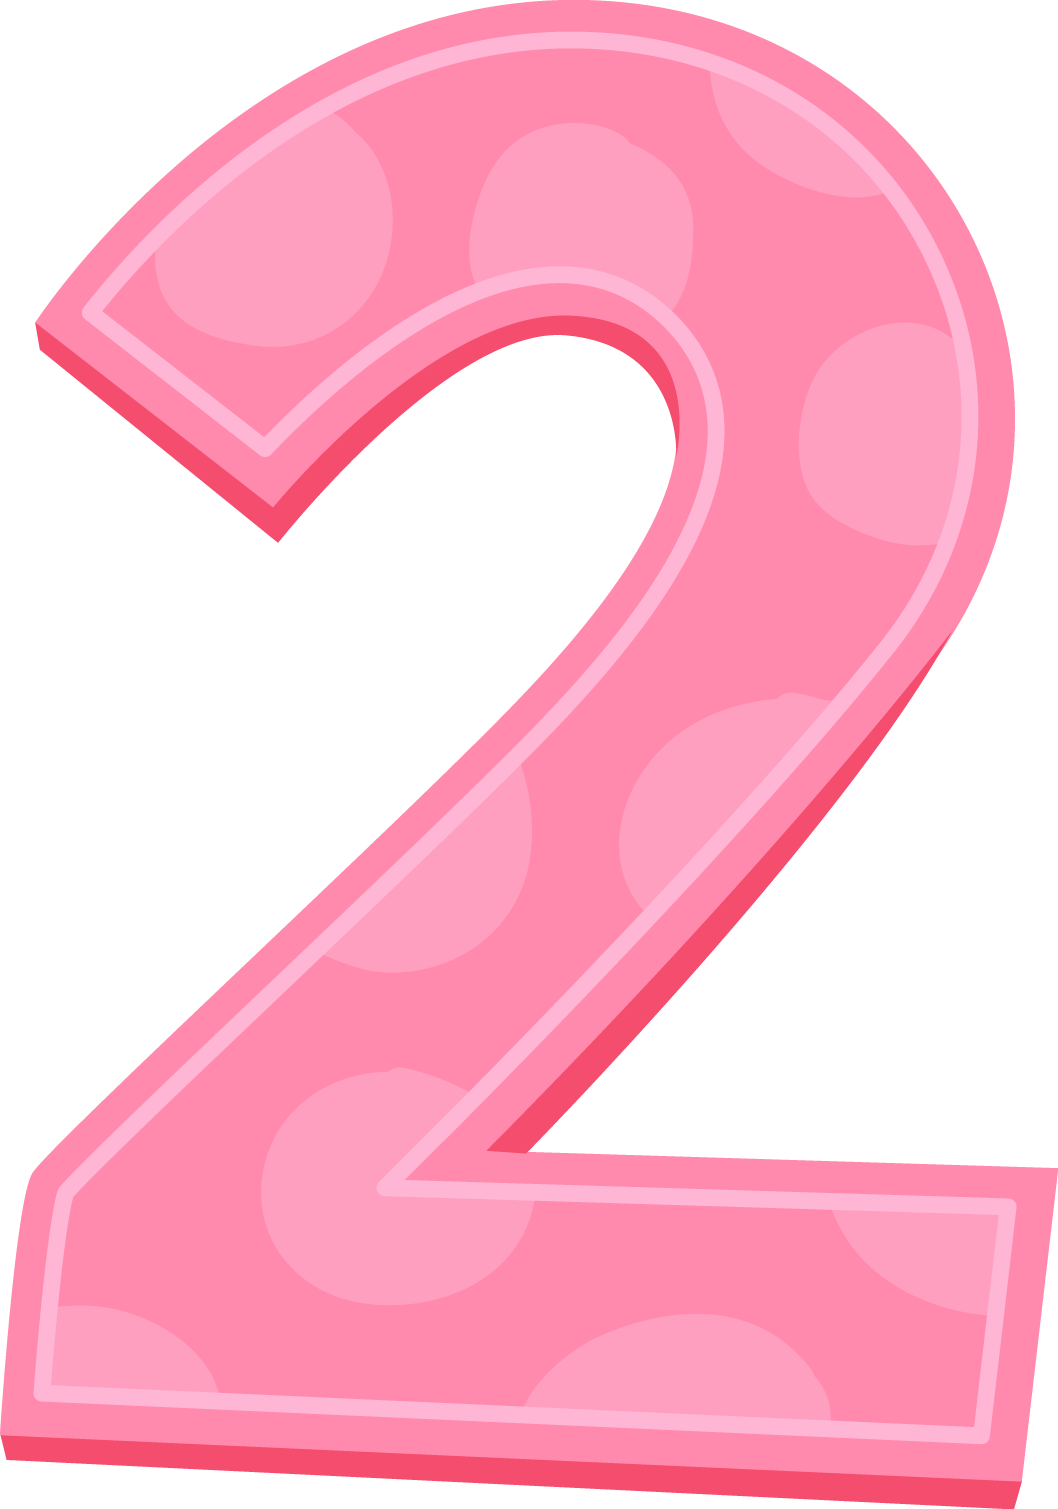 number-3-clipart-pink-number-two-number-3-pink-number-two-transparent